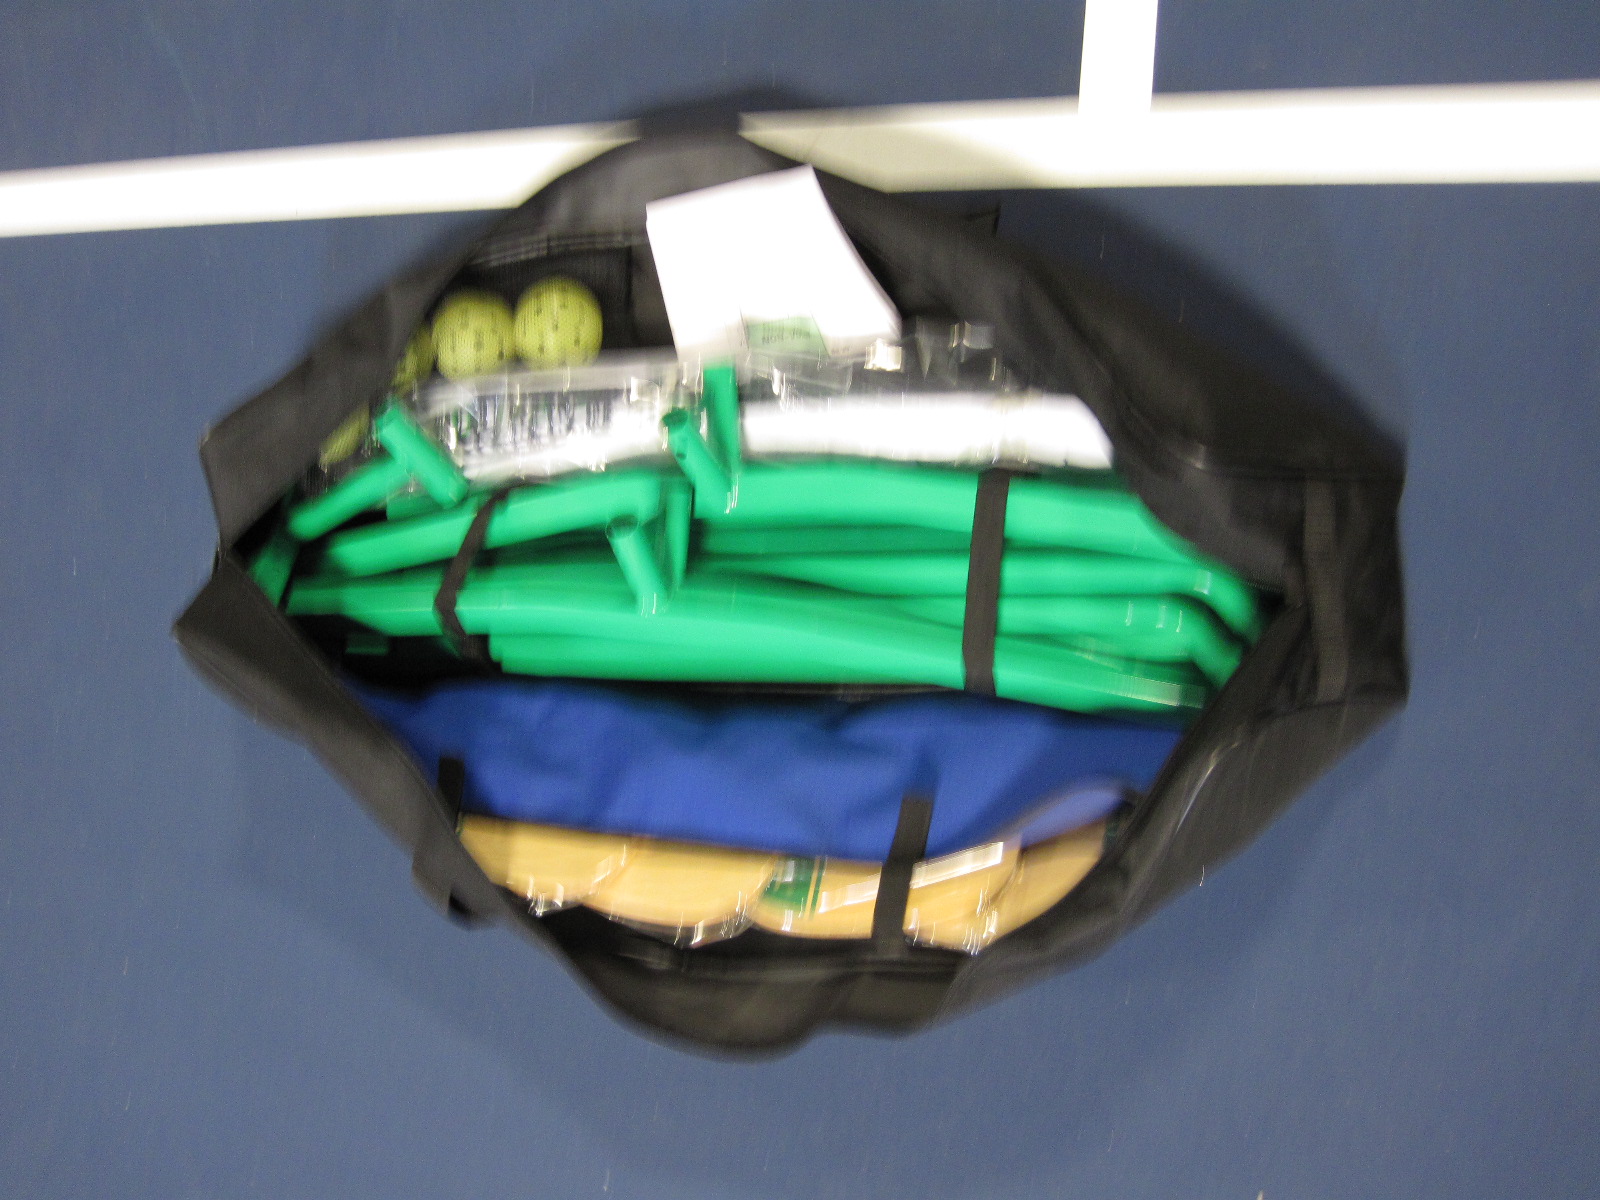 3.0 Tournament Net bag can hold 4 pickleballs and 4 paddles plus the entire net system